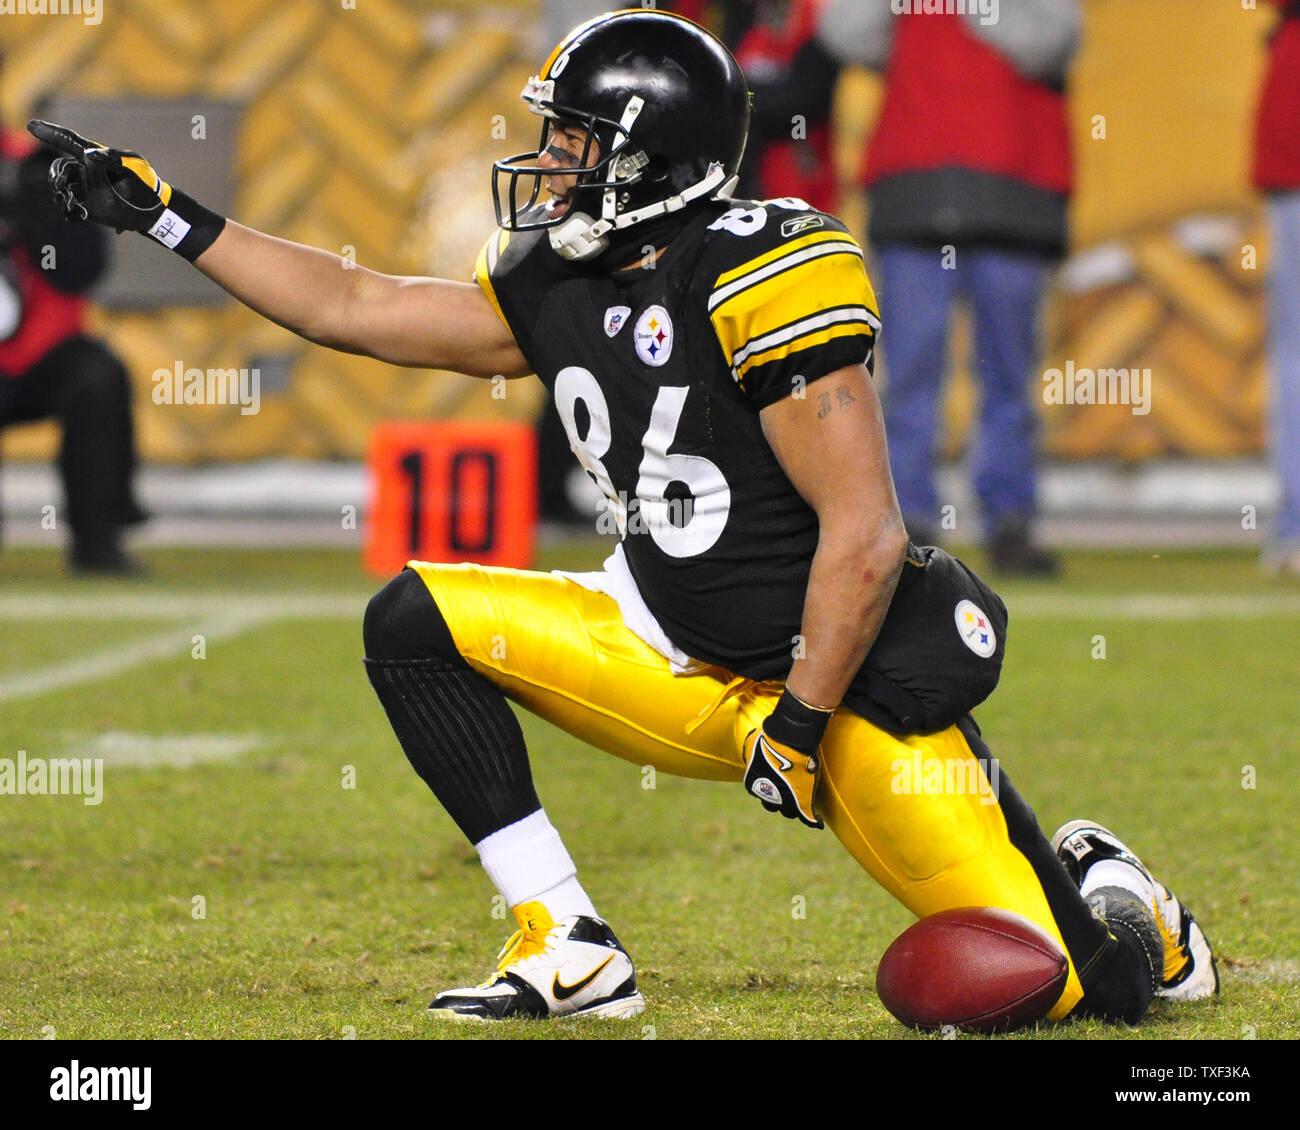 Pittsburgh Steelers wide receiver Hines Ward poses and points to the endzone following a 17 yards reception in the third quarter of the Steelers 37-36 win  at Heinz Field in Pittsburgh, Pennsylvania on December 20, 2009.     UPI/Archie Carpenter Stock Photo